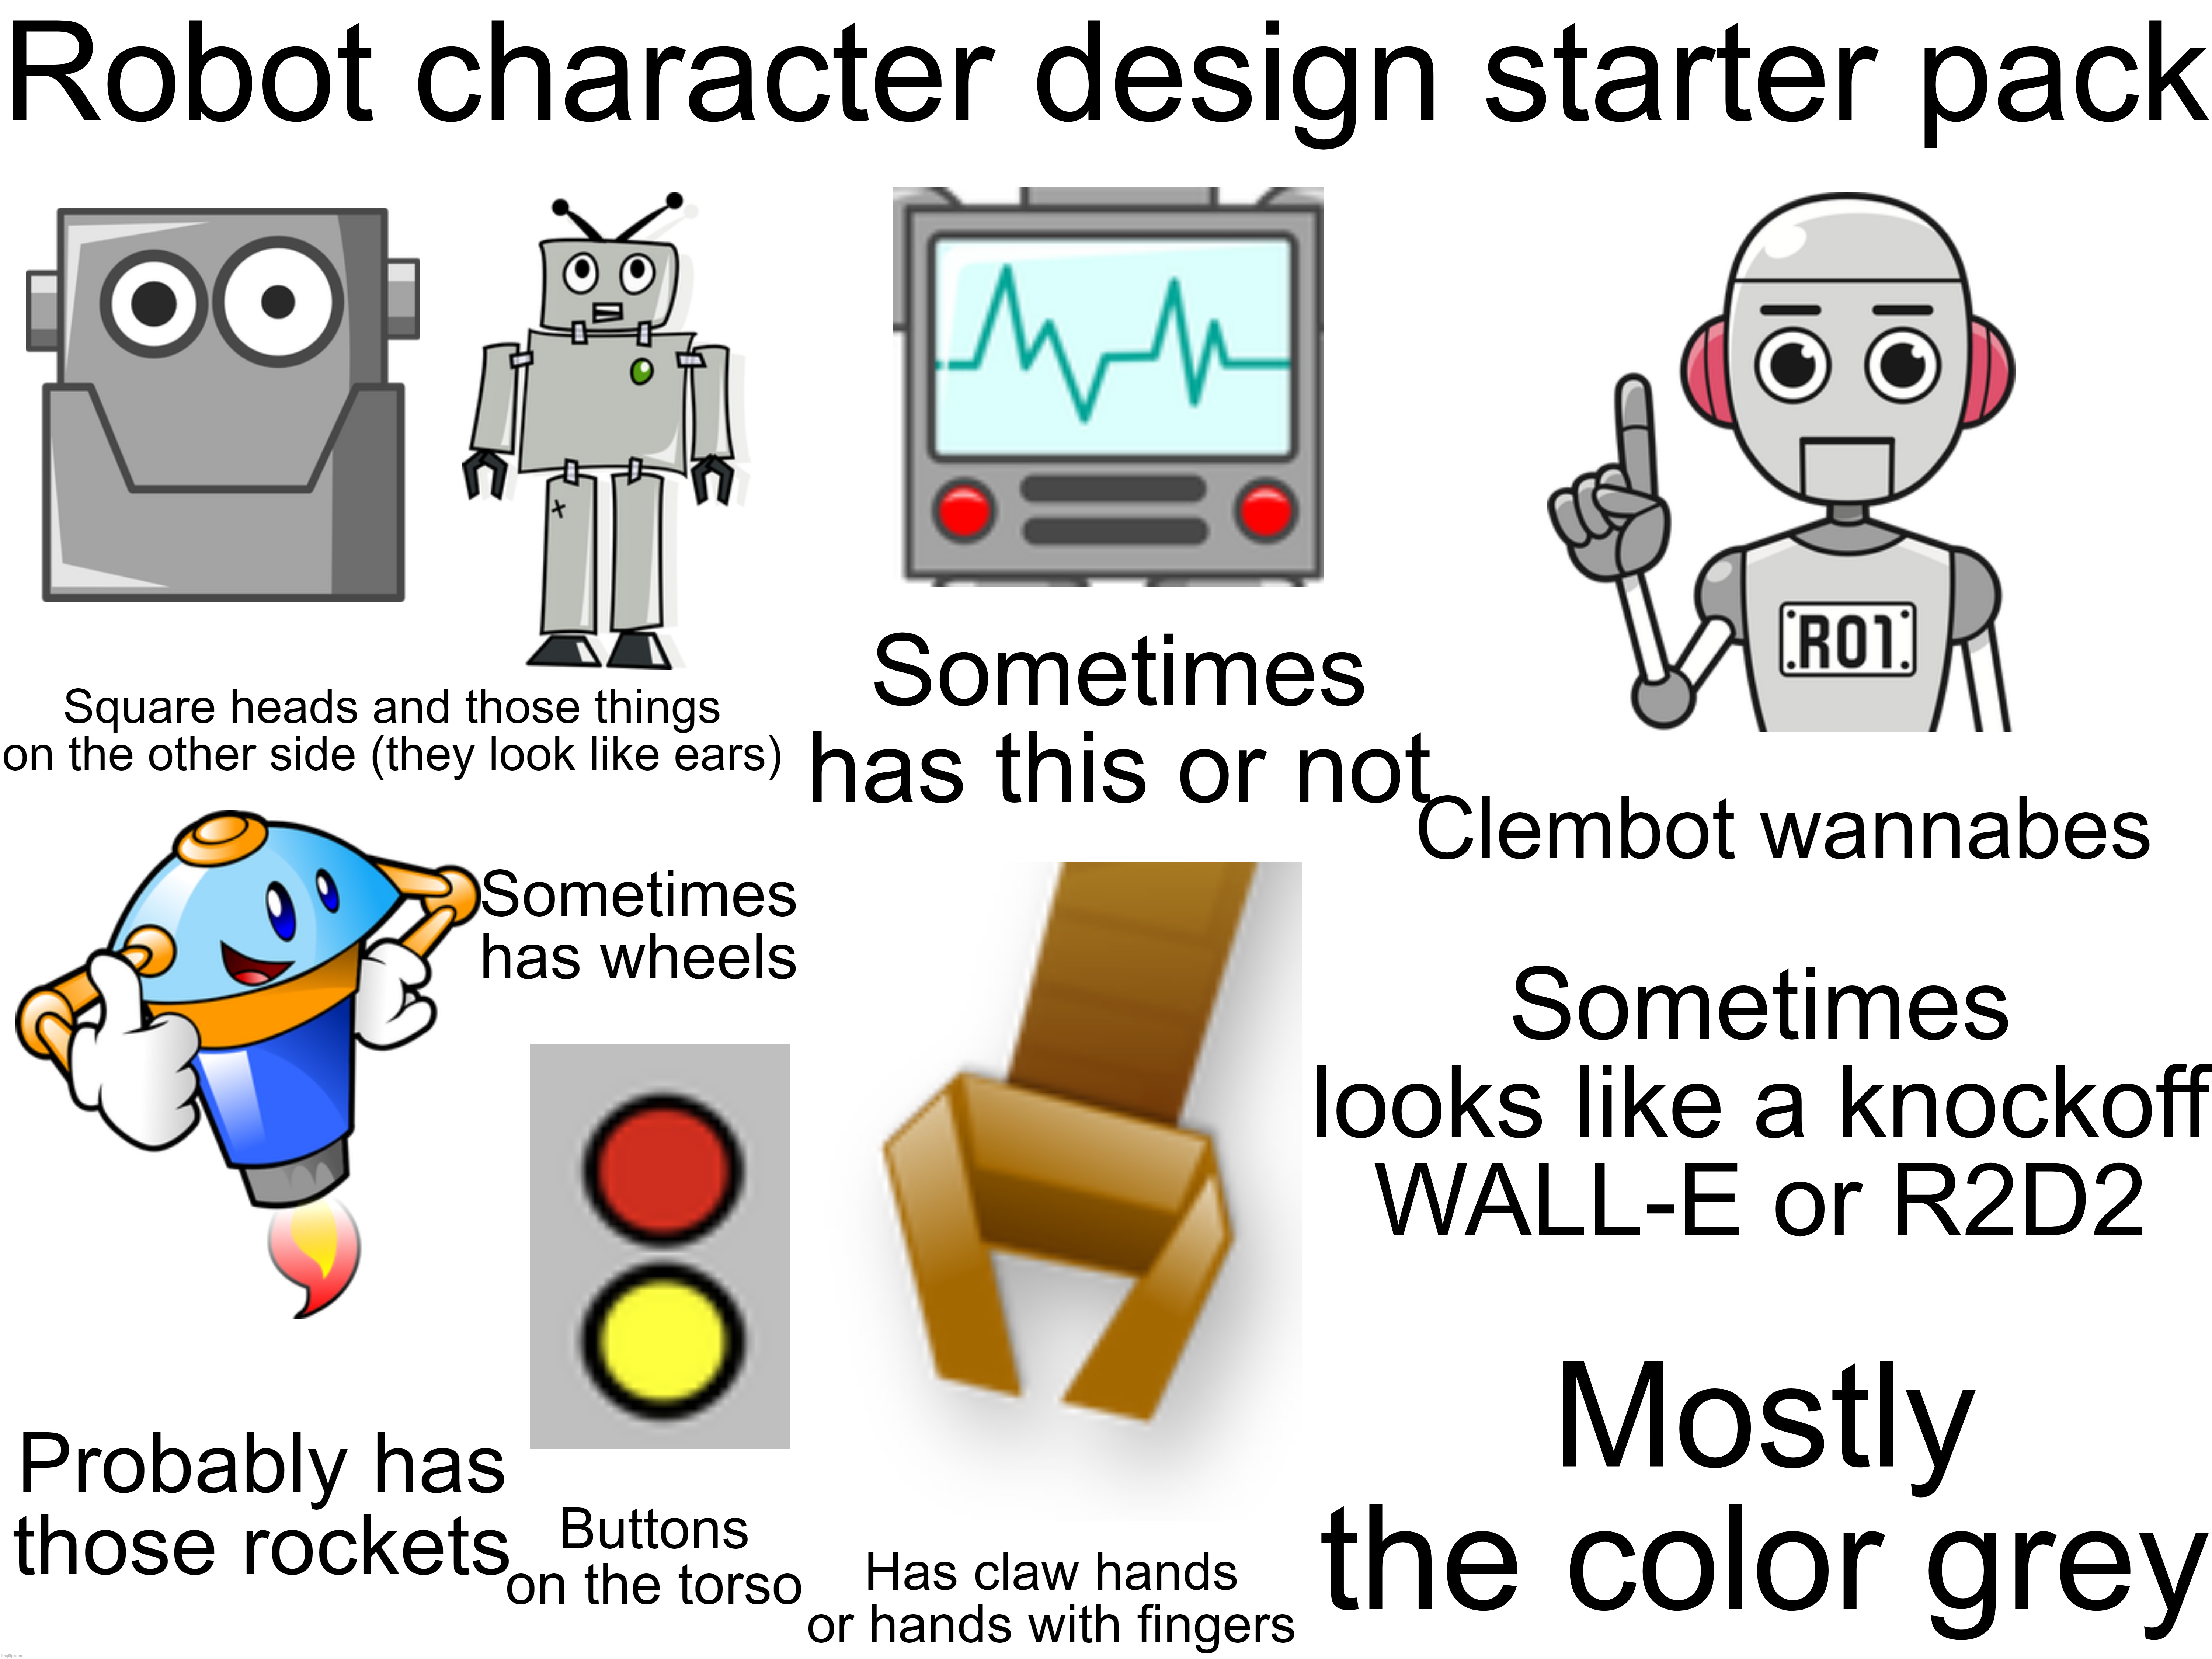 Robot character design starter pack | Robot character design starter pack; Sometimes has this or not; Square heads and those things on the other side (they look like ears); Clembot wannabes; Sometimes has wheels; Sometimes looks like a knockoff WALL-E or R2D2; Mostly the color grey; Probably has those rockets; Buttons on the torso; Has claw hands or hands with fingers | image tagged in robot,character,design,starter pack | made w/ Imgflip meme maker